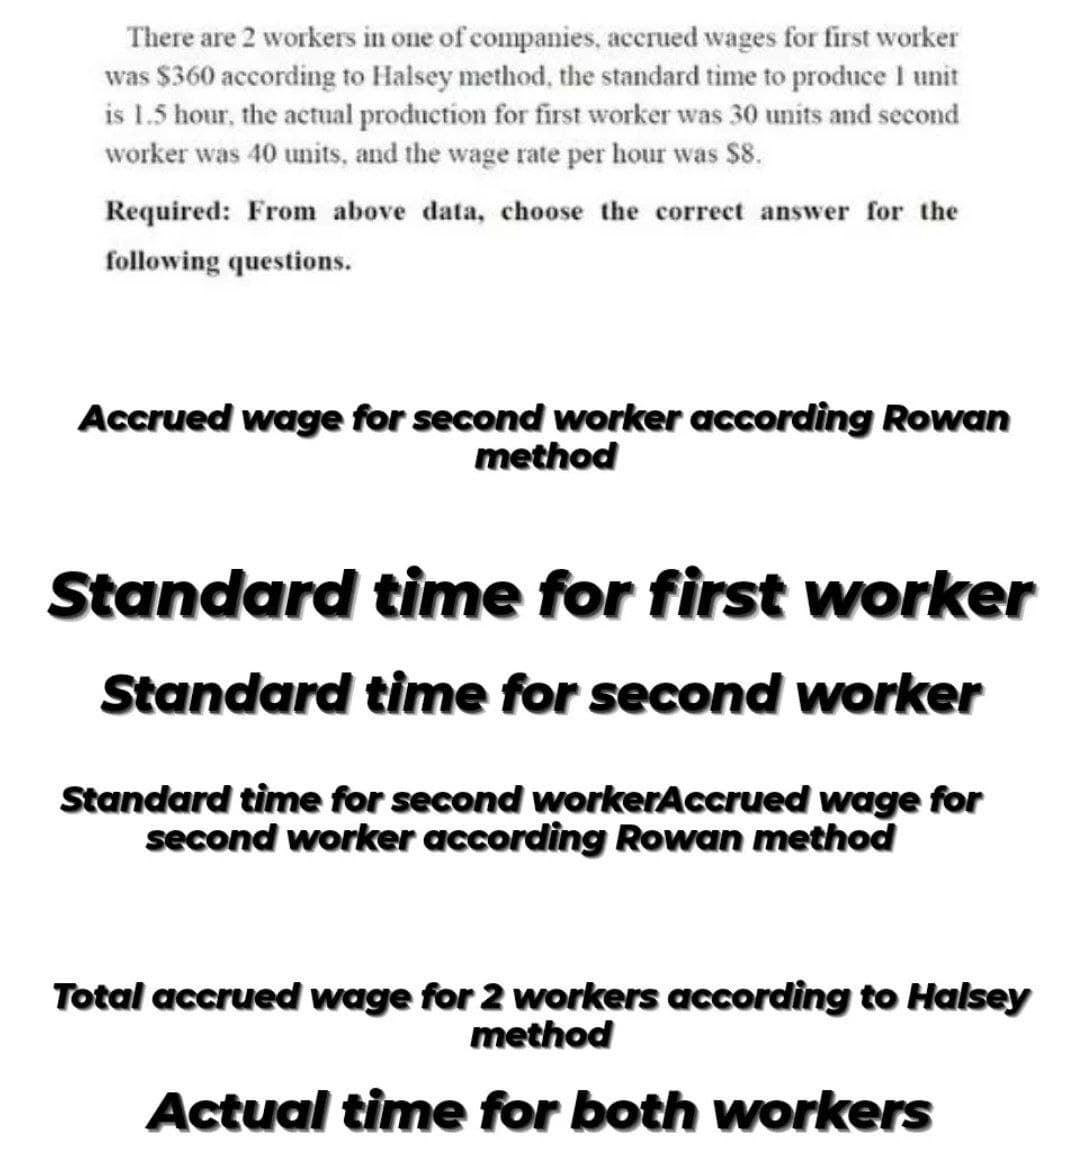 There are 2 workers in one of companies, accrued wages for first worker
was $360 according to Halsey method, the standard time to produce I unit
is 1.5 hour, the actual production for first worker was 30 units and second
worker was 40 units, and the wage rate per hour was $8.
Required: From above data, choose the correct answer for the
following questions.
Accrued wage for second worker according Rowan
method
Standard time for first worker
Standard time for second worker
Standard time for second workerAccrued wage for
second worker according Rowan method
Total accrued wage for 2 workers according to Halsey
method
Actual time for both workers
